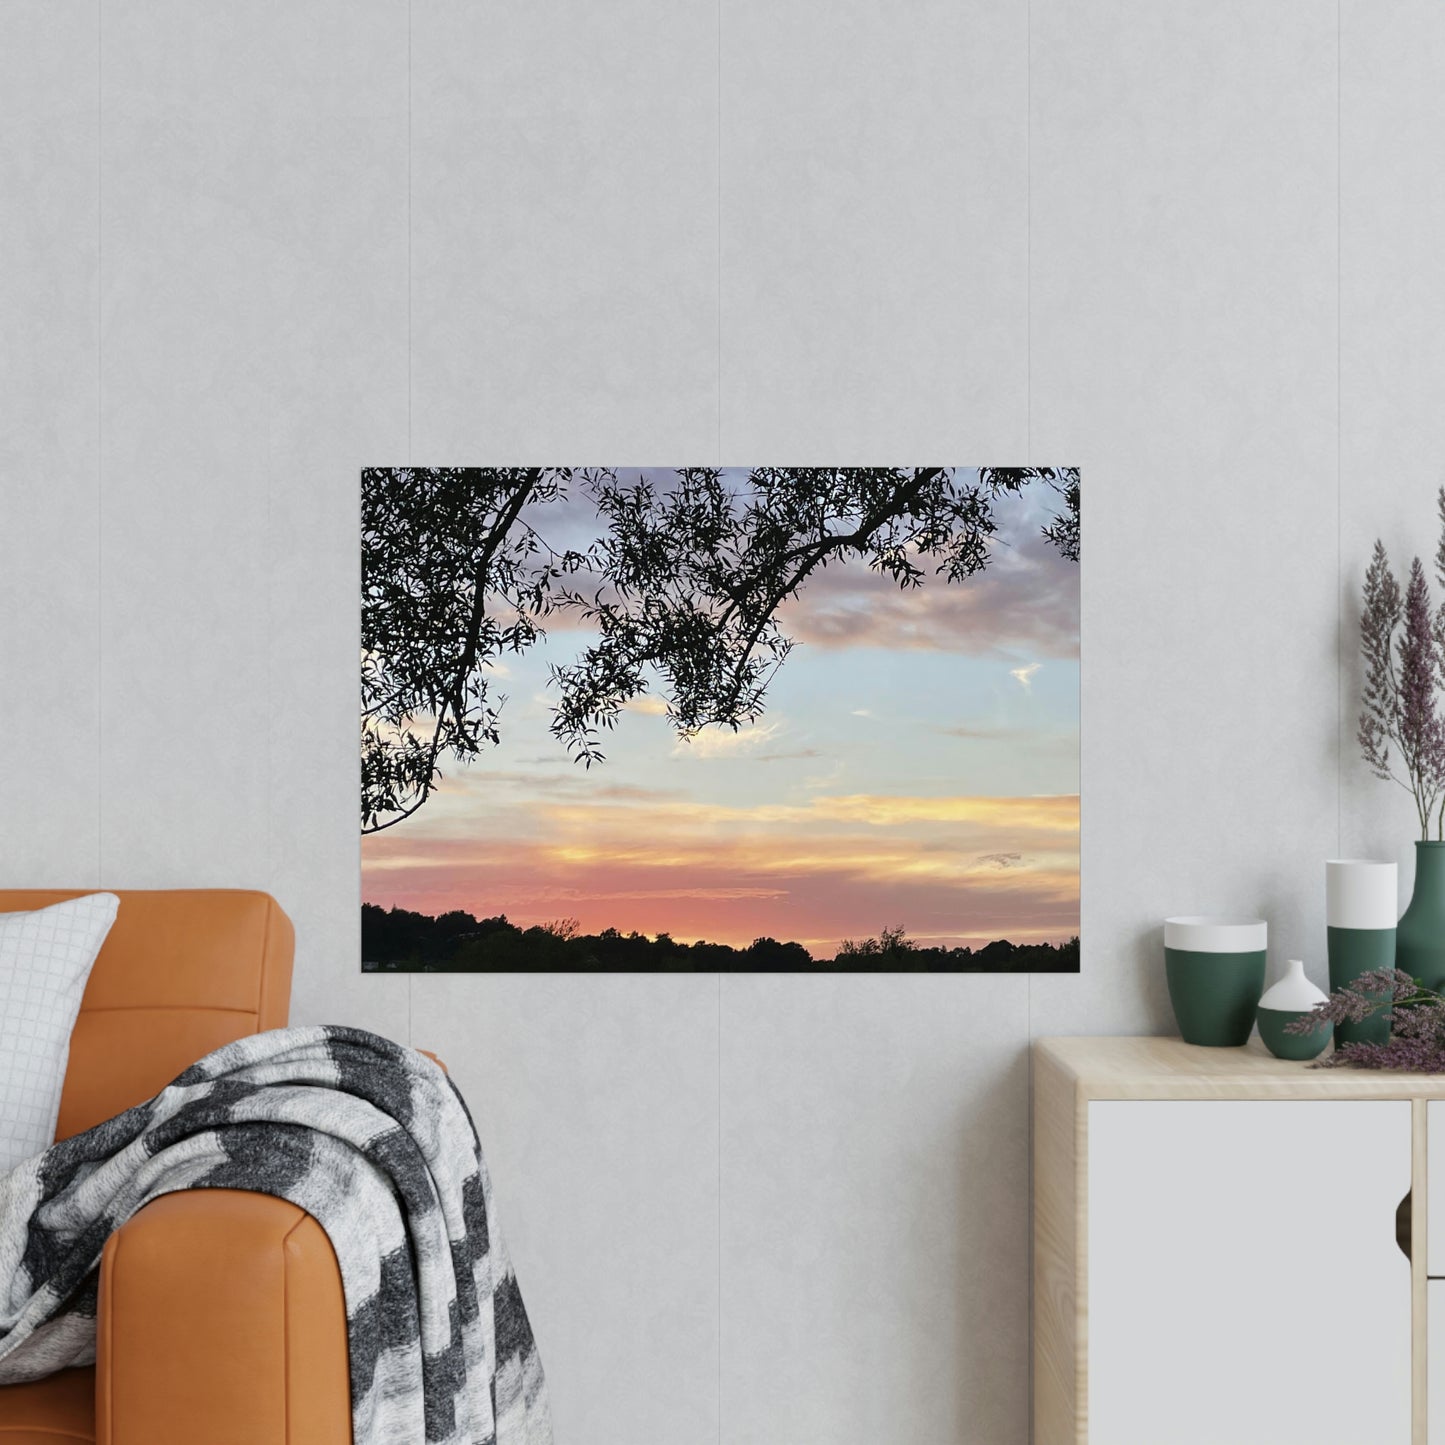 Portrait and Landscape Posters - HobbyMeFree